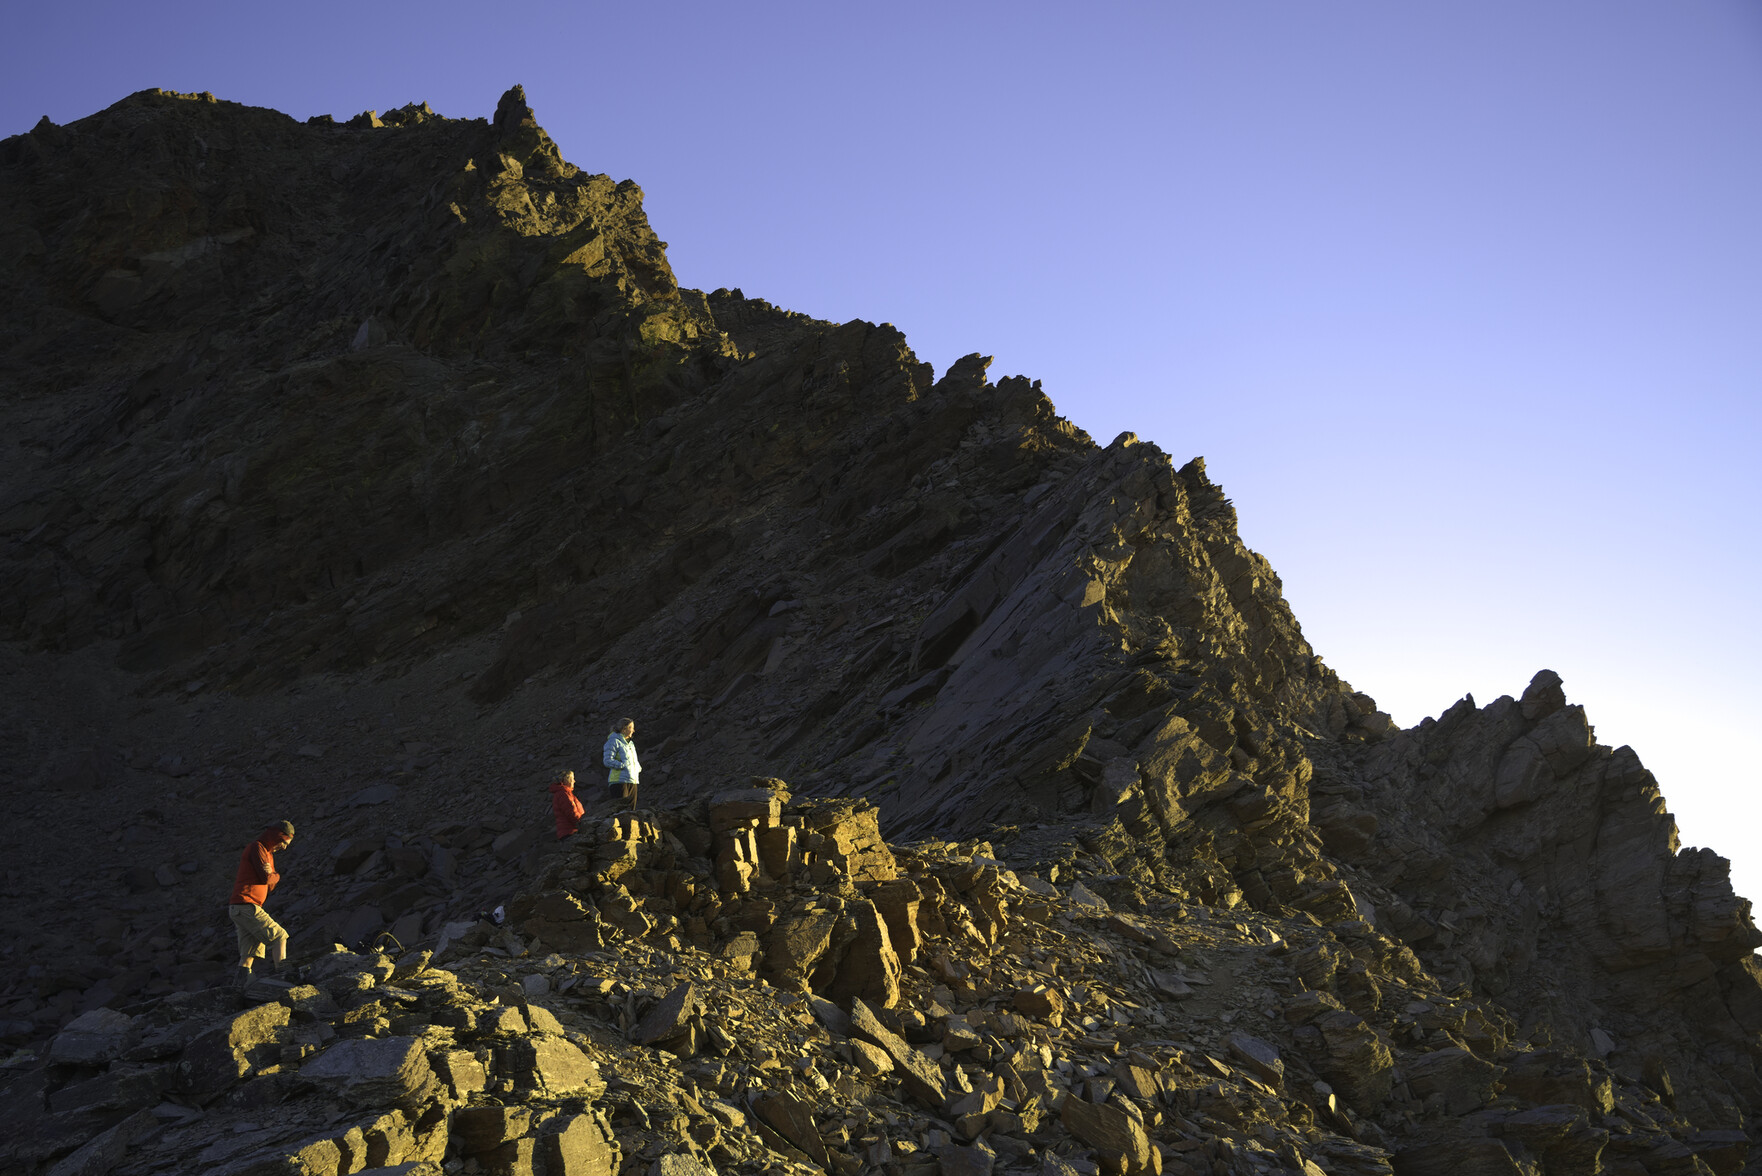 A group of people illuminated in the evening sunshine watch the sunset. behind rises a spiky mountain ridge